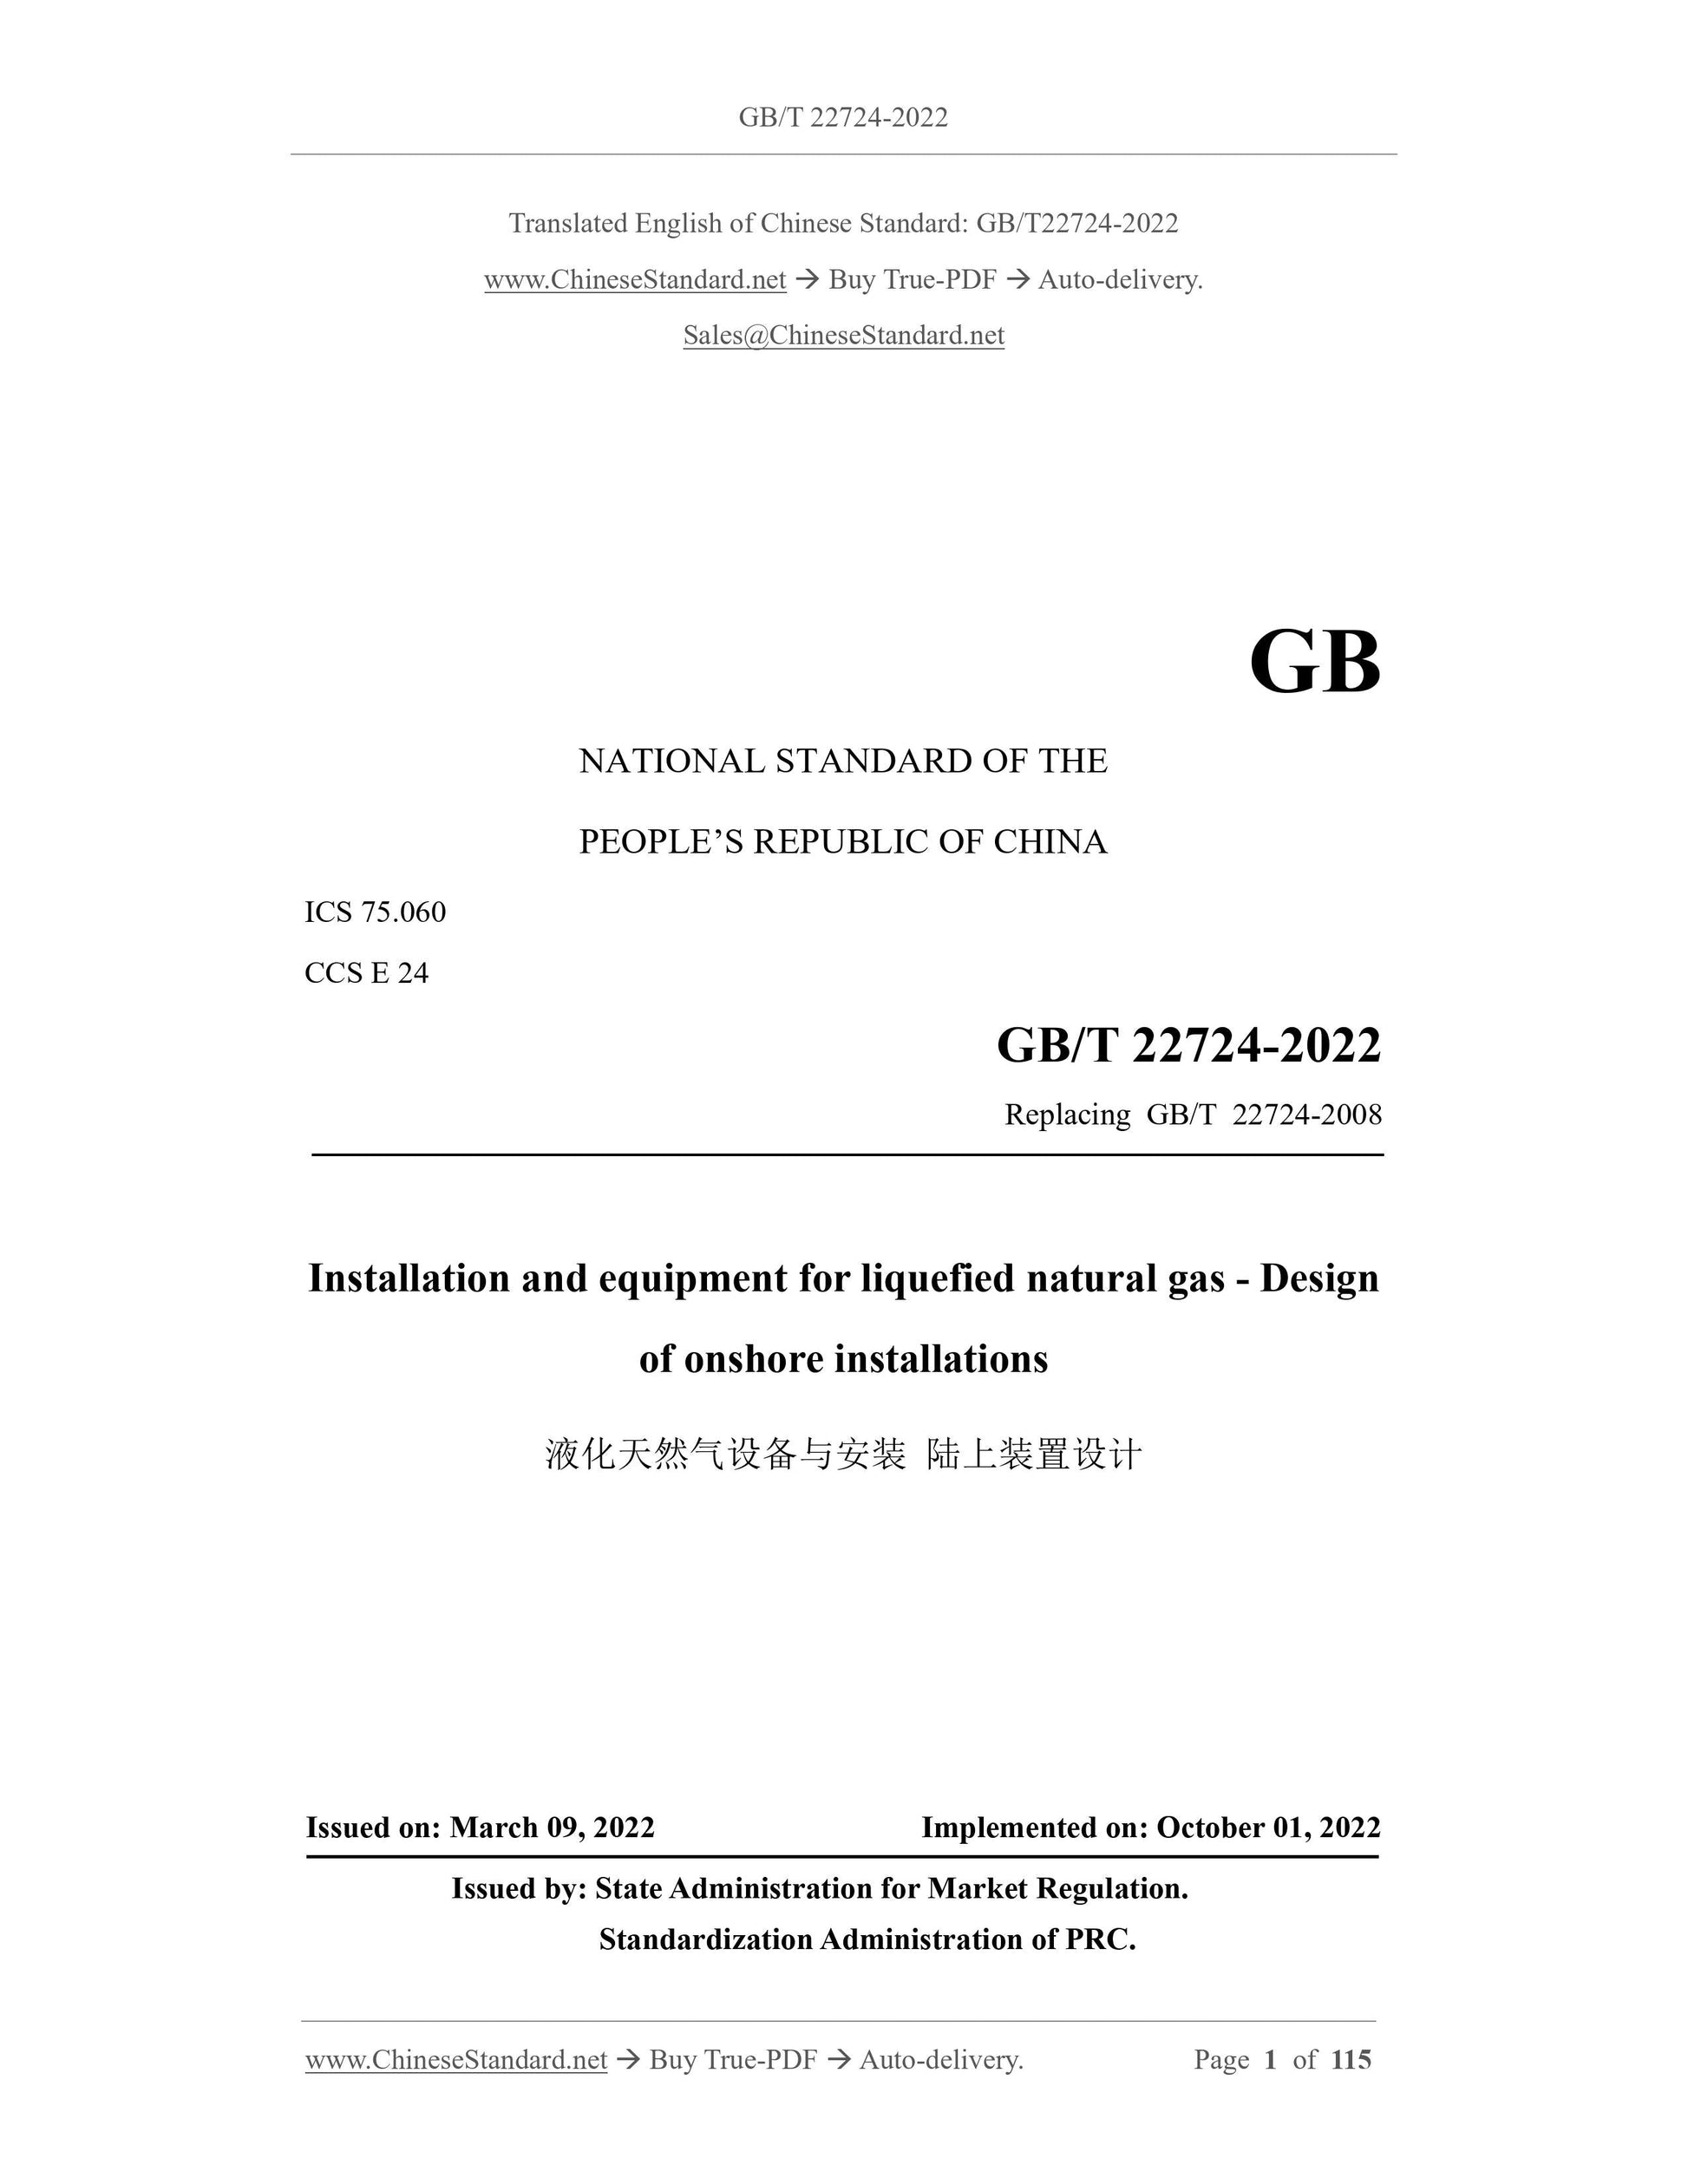 GB/T 22724-2022 Page 1